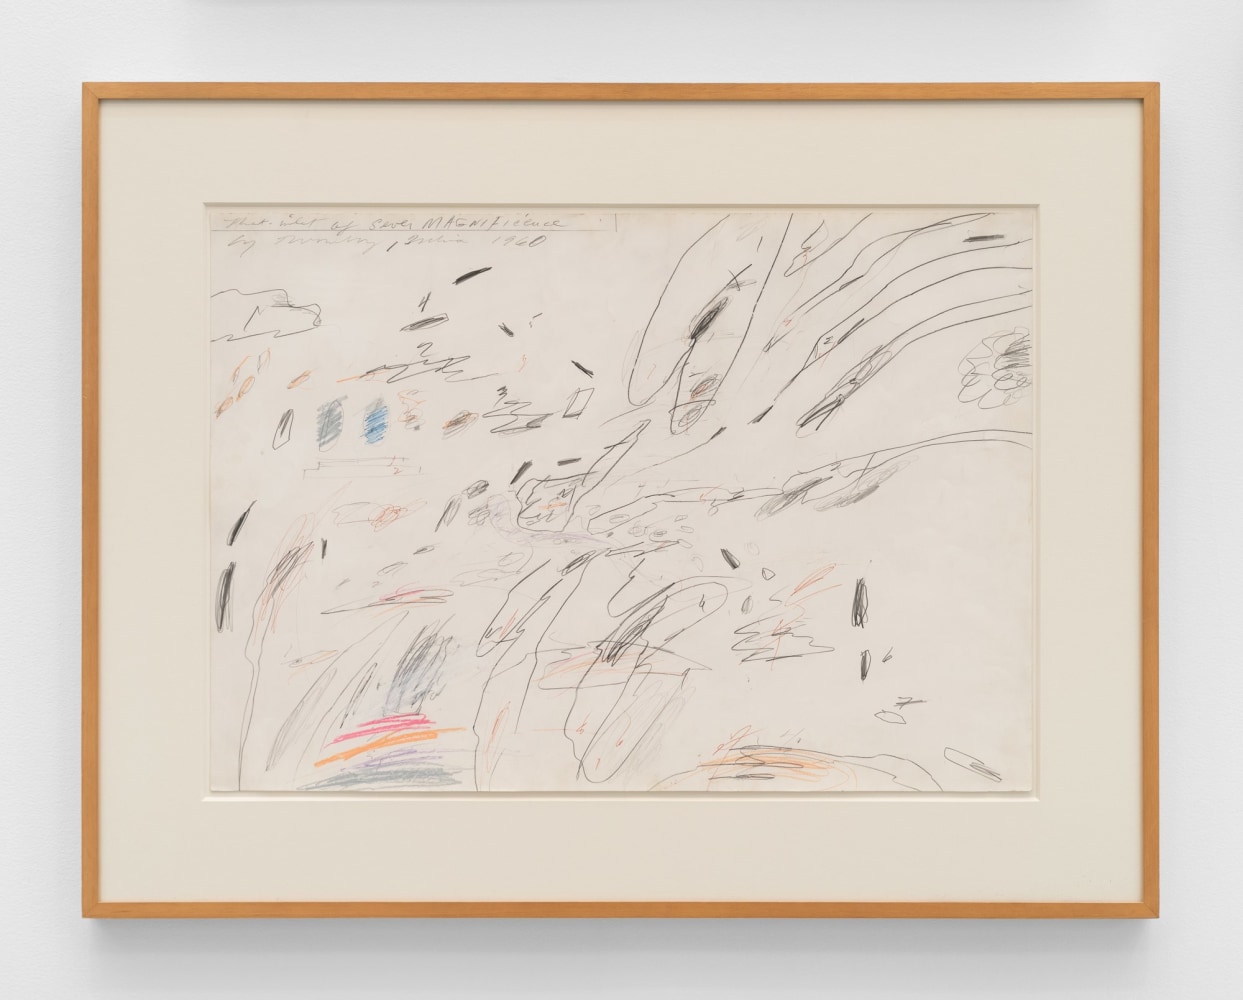 Cy Twombly
Untitled,1960
Graphite, colored pencil, pastel and pen on paper
19&amp;nbsp;⅝ &amp;times; 27&amp;nbsp;⅞ in.
(49.8 &amp;times; 70.8 cm)
Private Collection
&amp;nbsp;